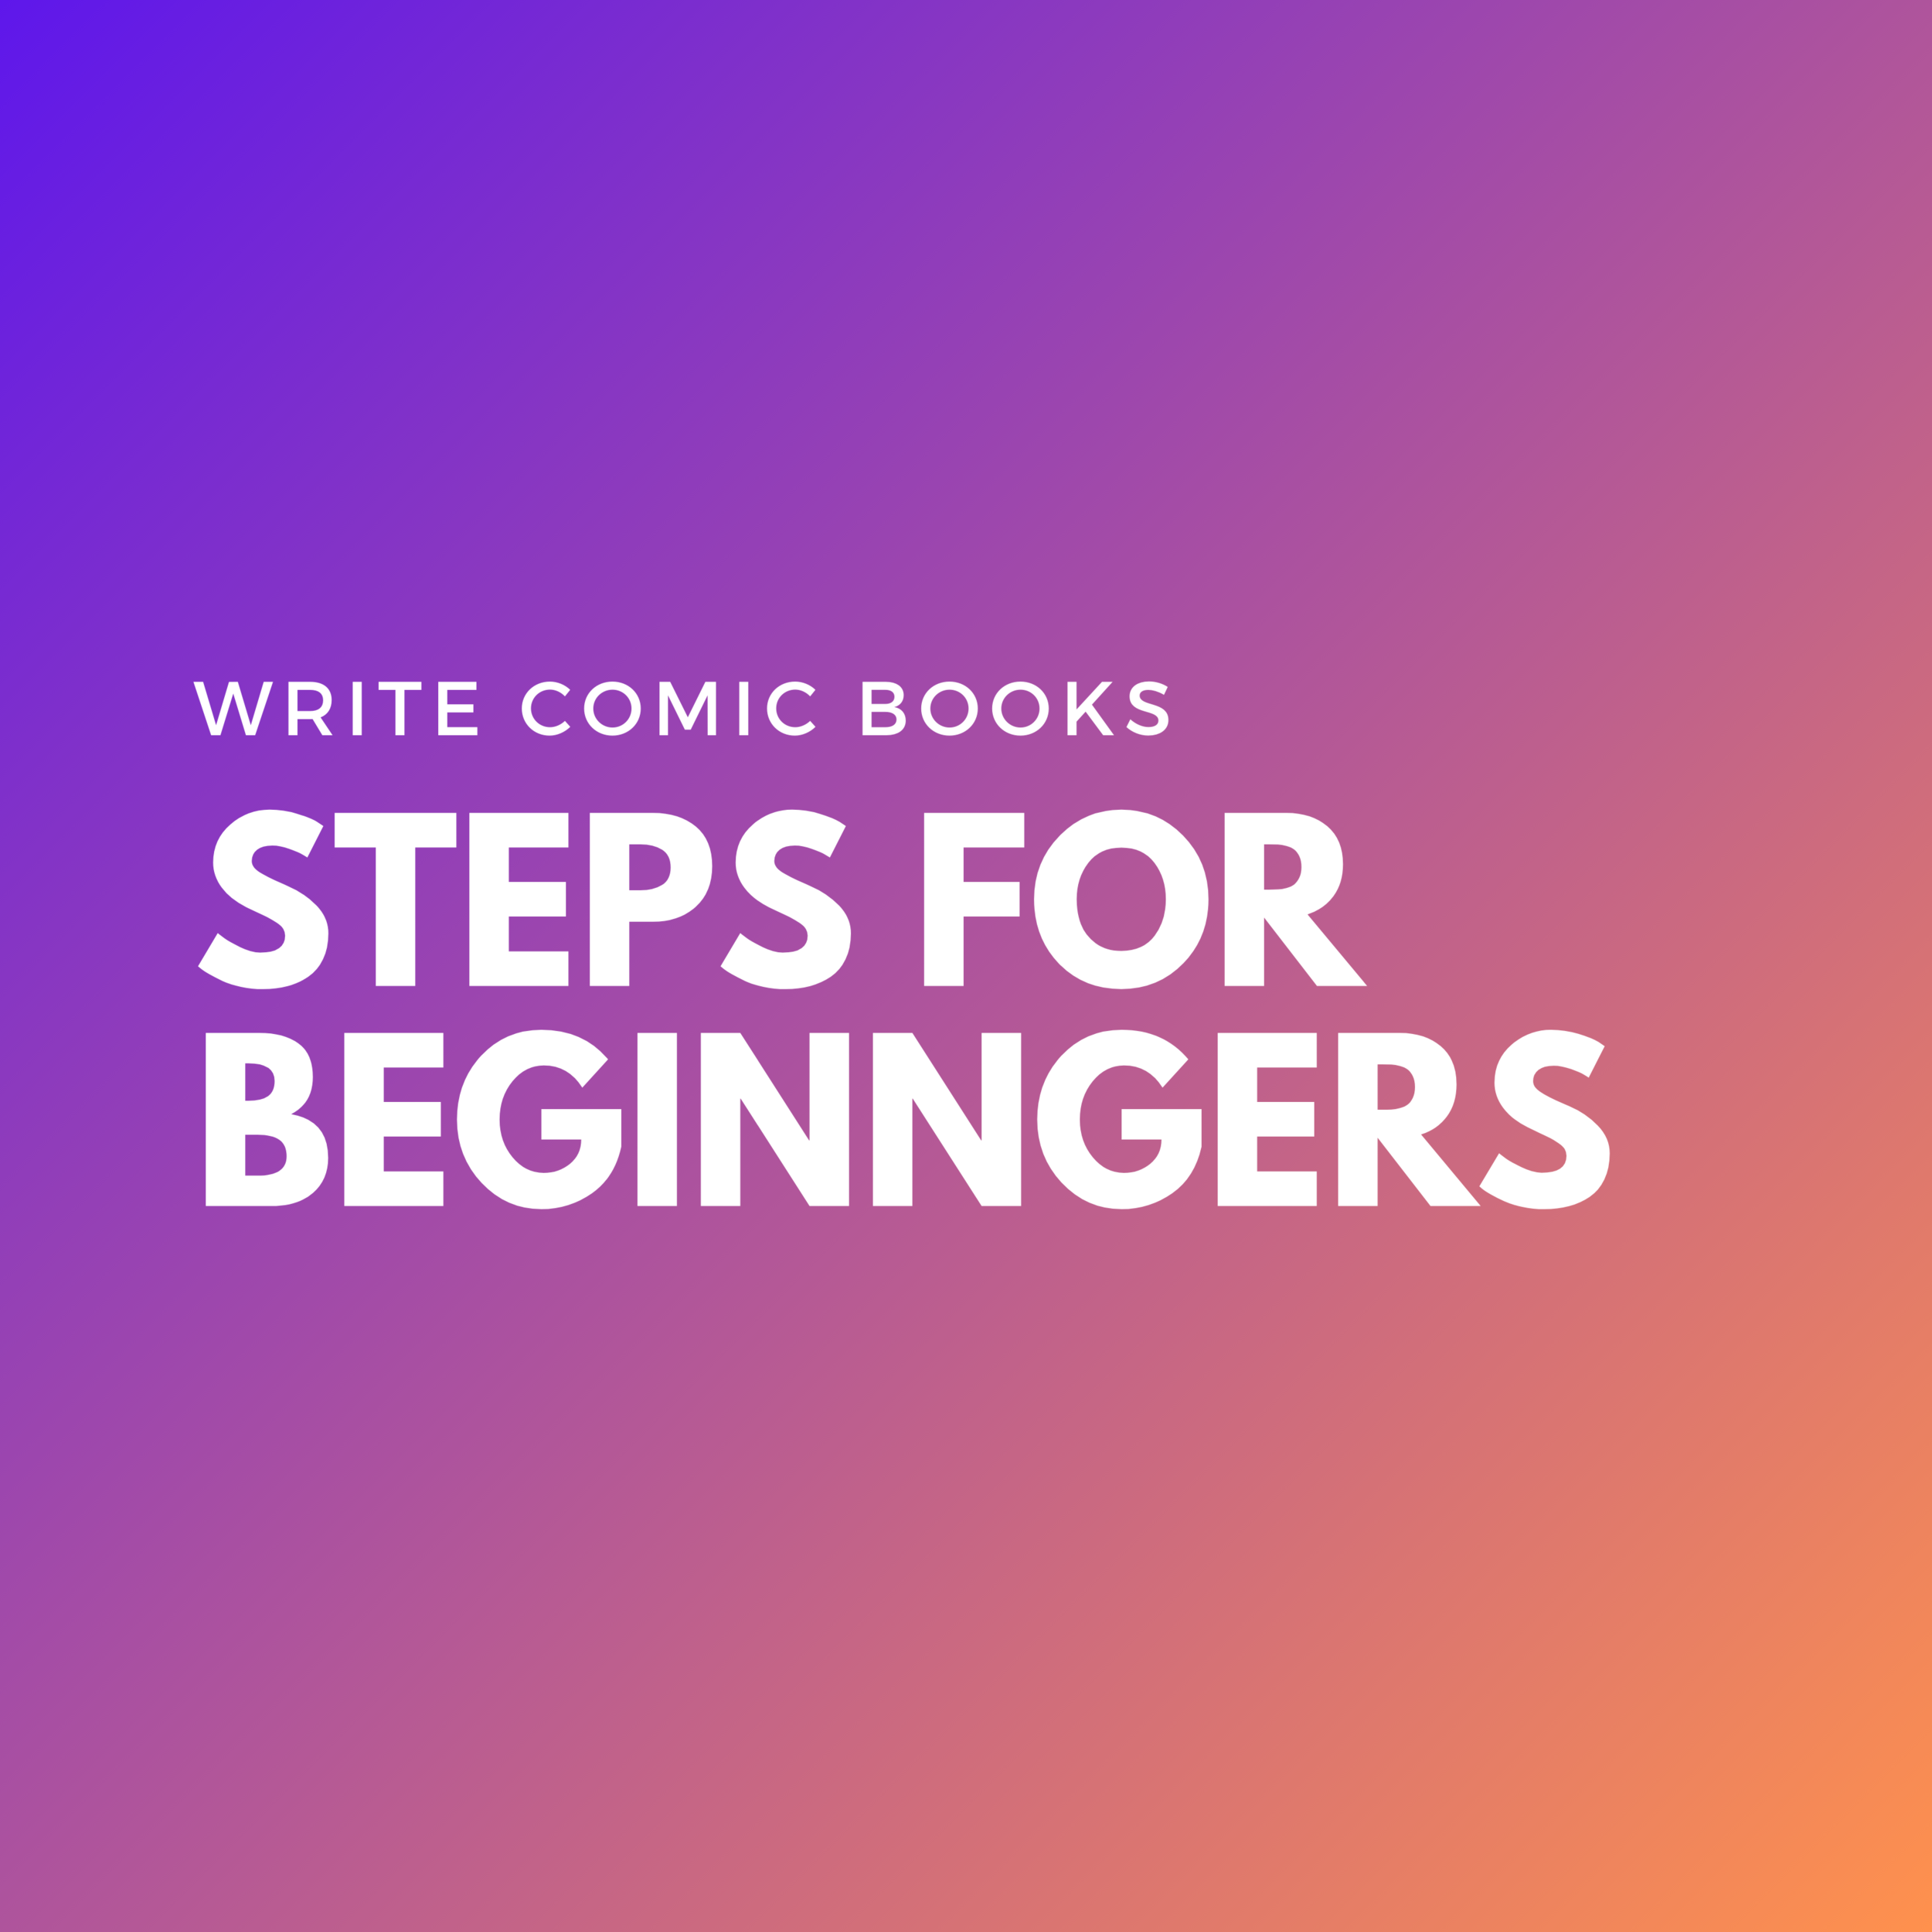 How to Write Comic Books: 5 Steps for Beginners